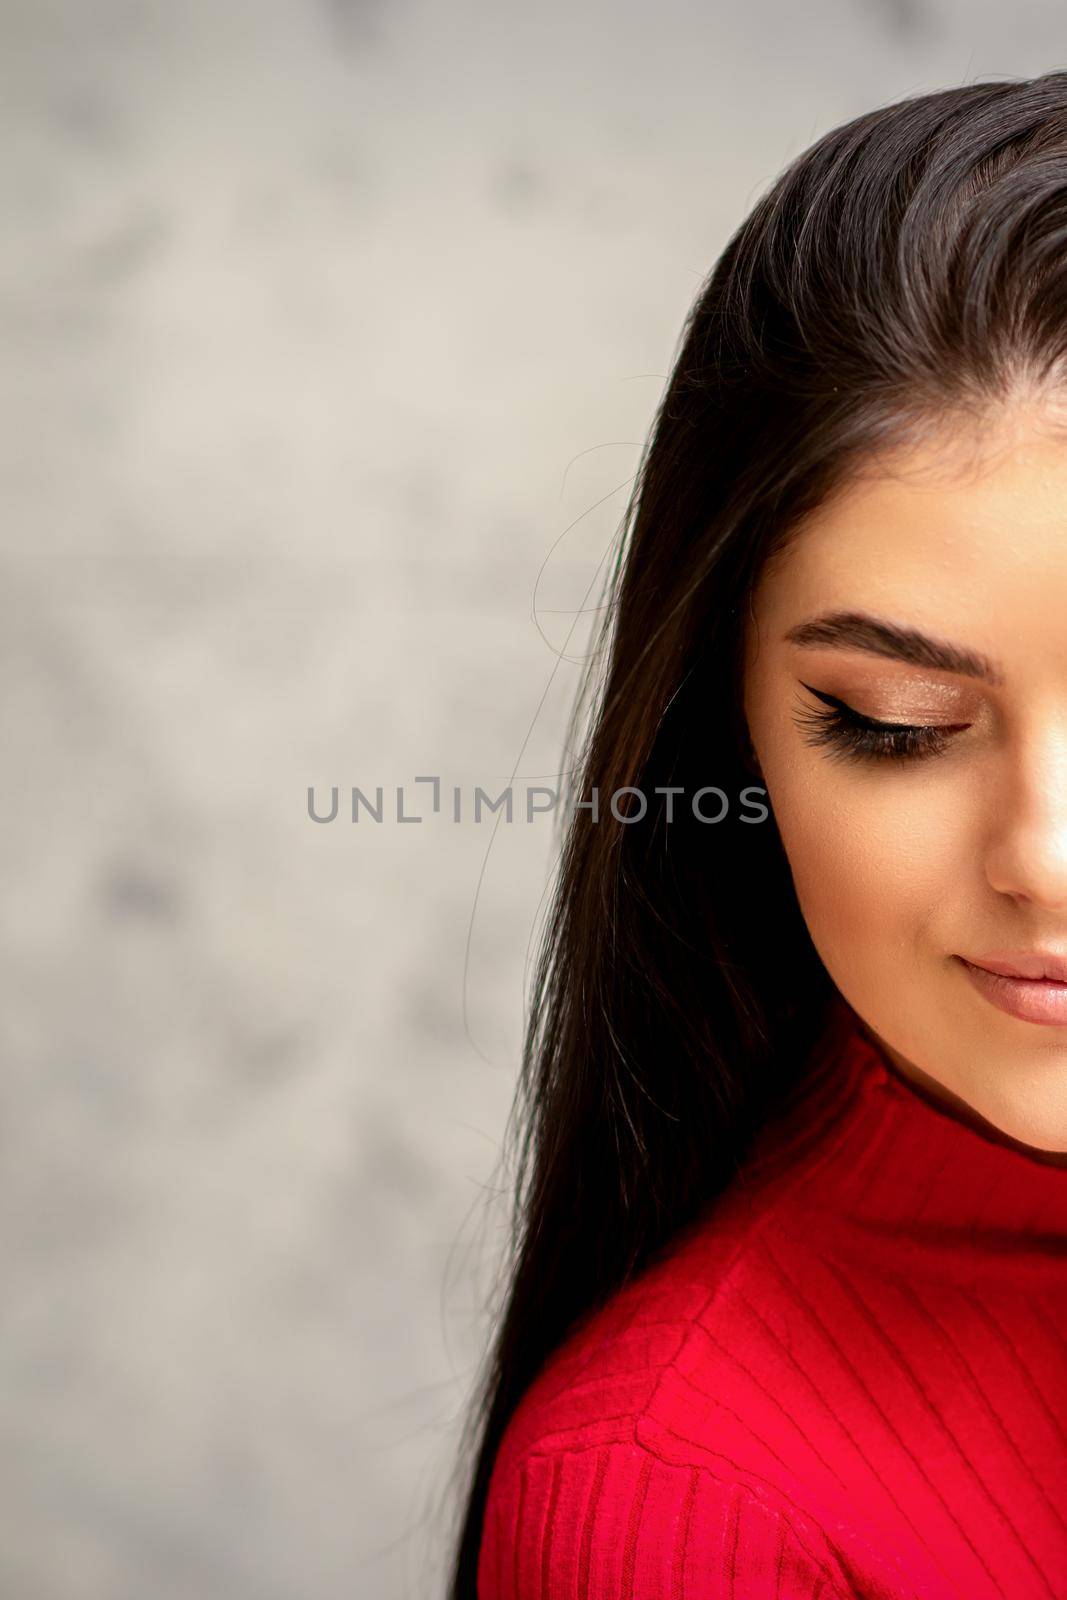 The fashionable young woman. Portrait of the beautiful female model with long hair and makeup with eyelash extensions. Beauty young woman with a black hairstyle on the background of a gray wall